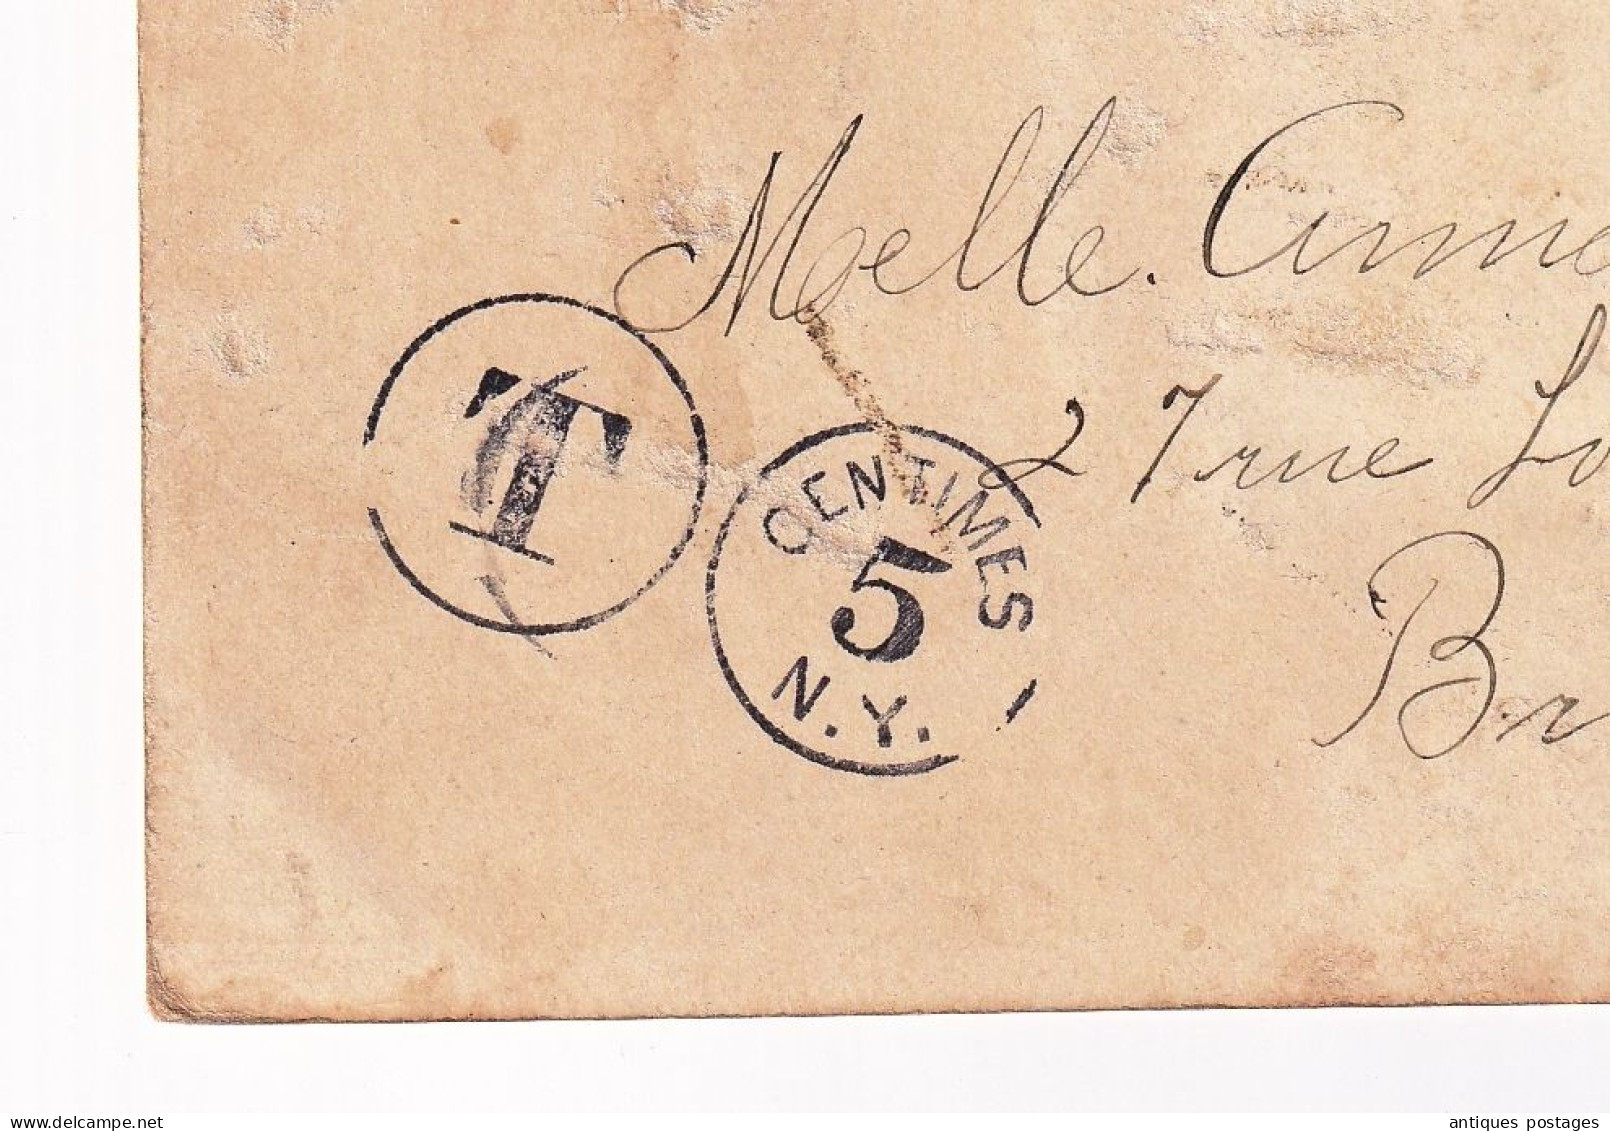 USA 1906 Manchester New York Bruxelles Belgique Tax 5 Centimes  J.P Morgan Exchange Stamp One Cent Benjamin Franklin - Covers & Documents